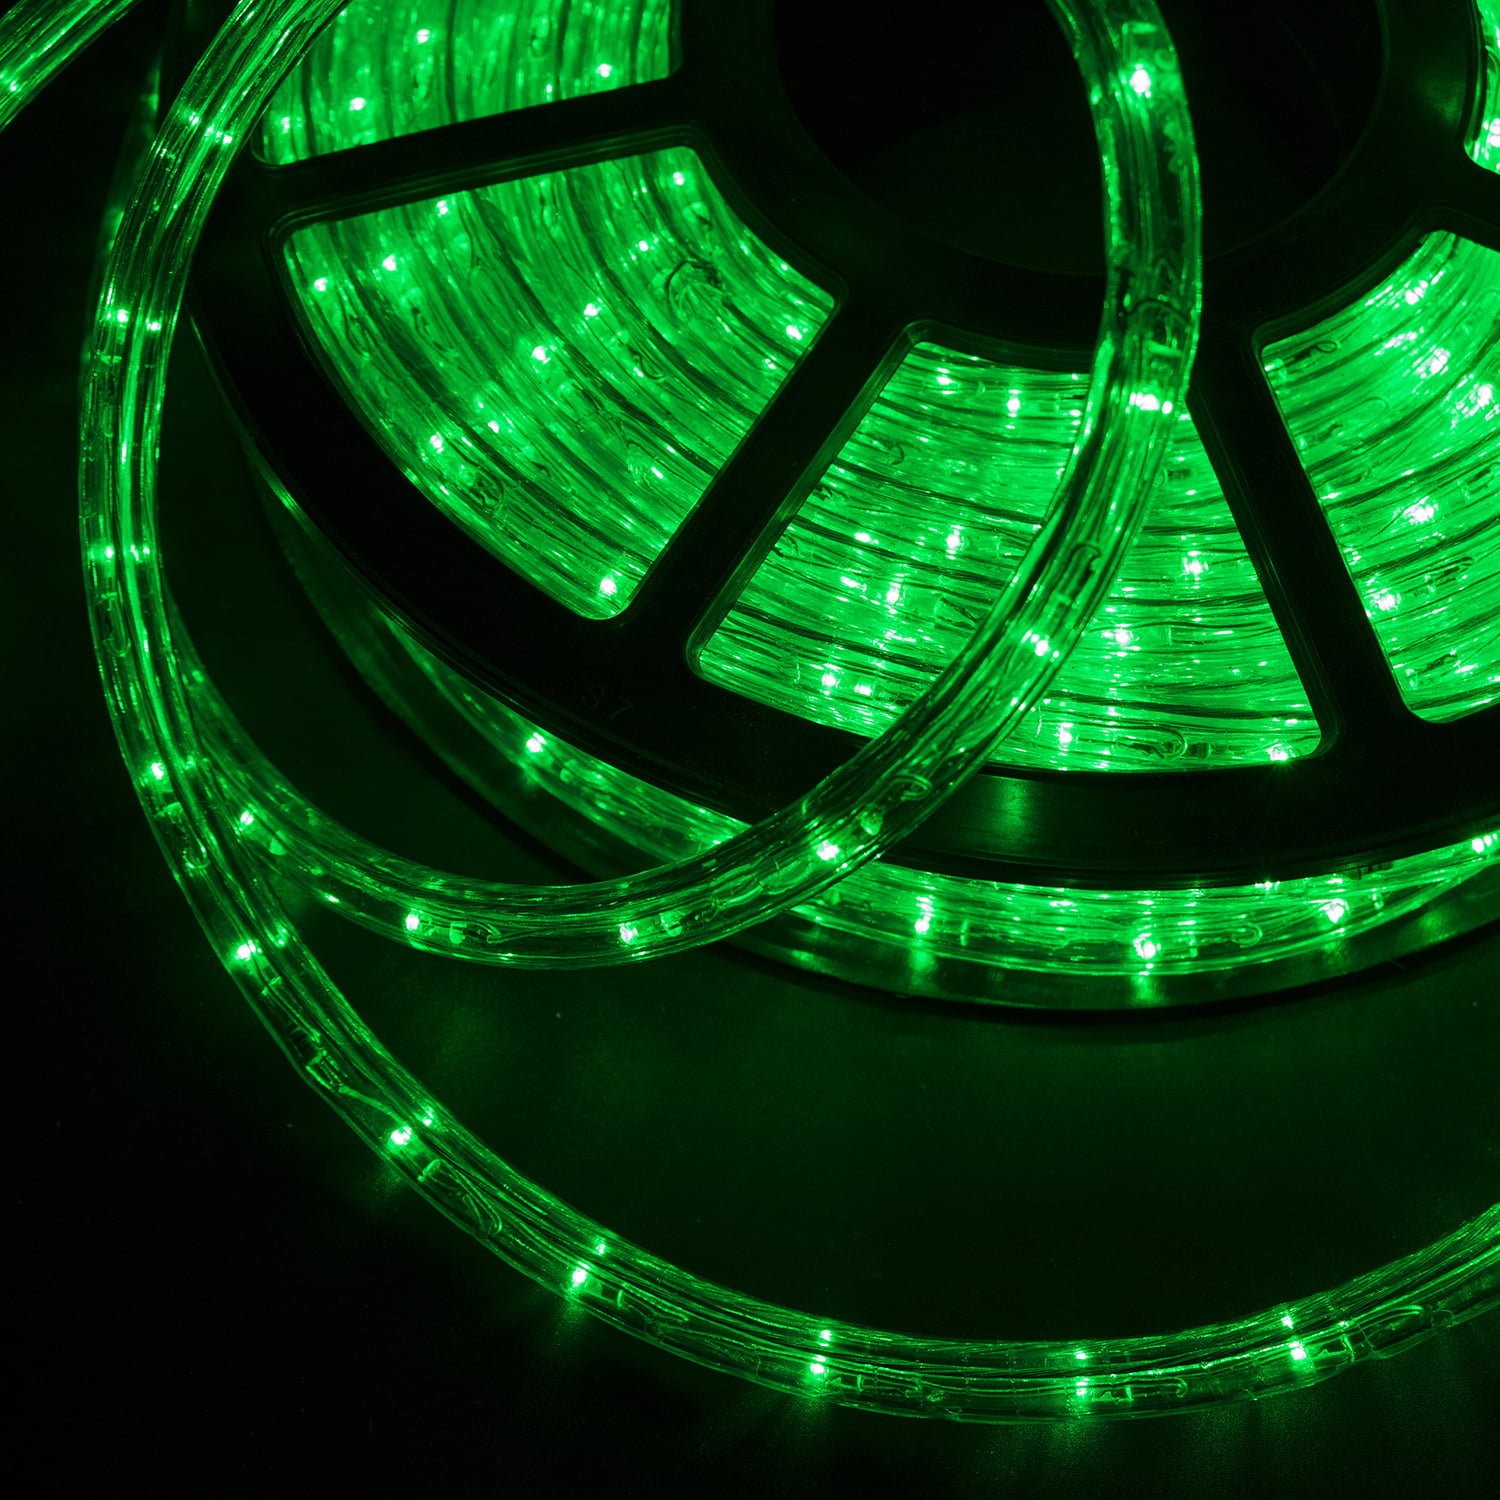 Details about   Celebrations Rope Lights 216 Green Lights 18' NEW FREE SHIPPING 